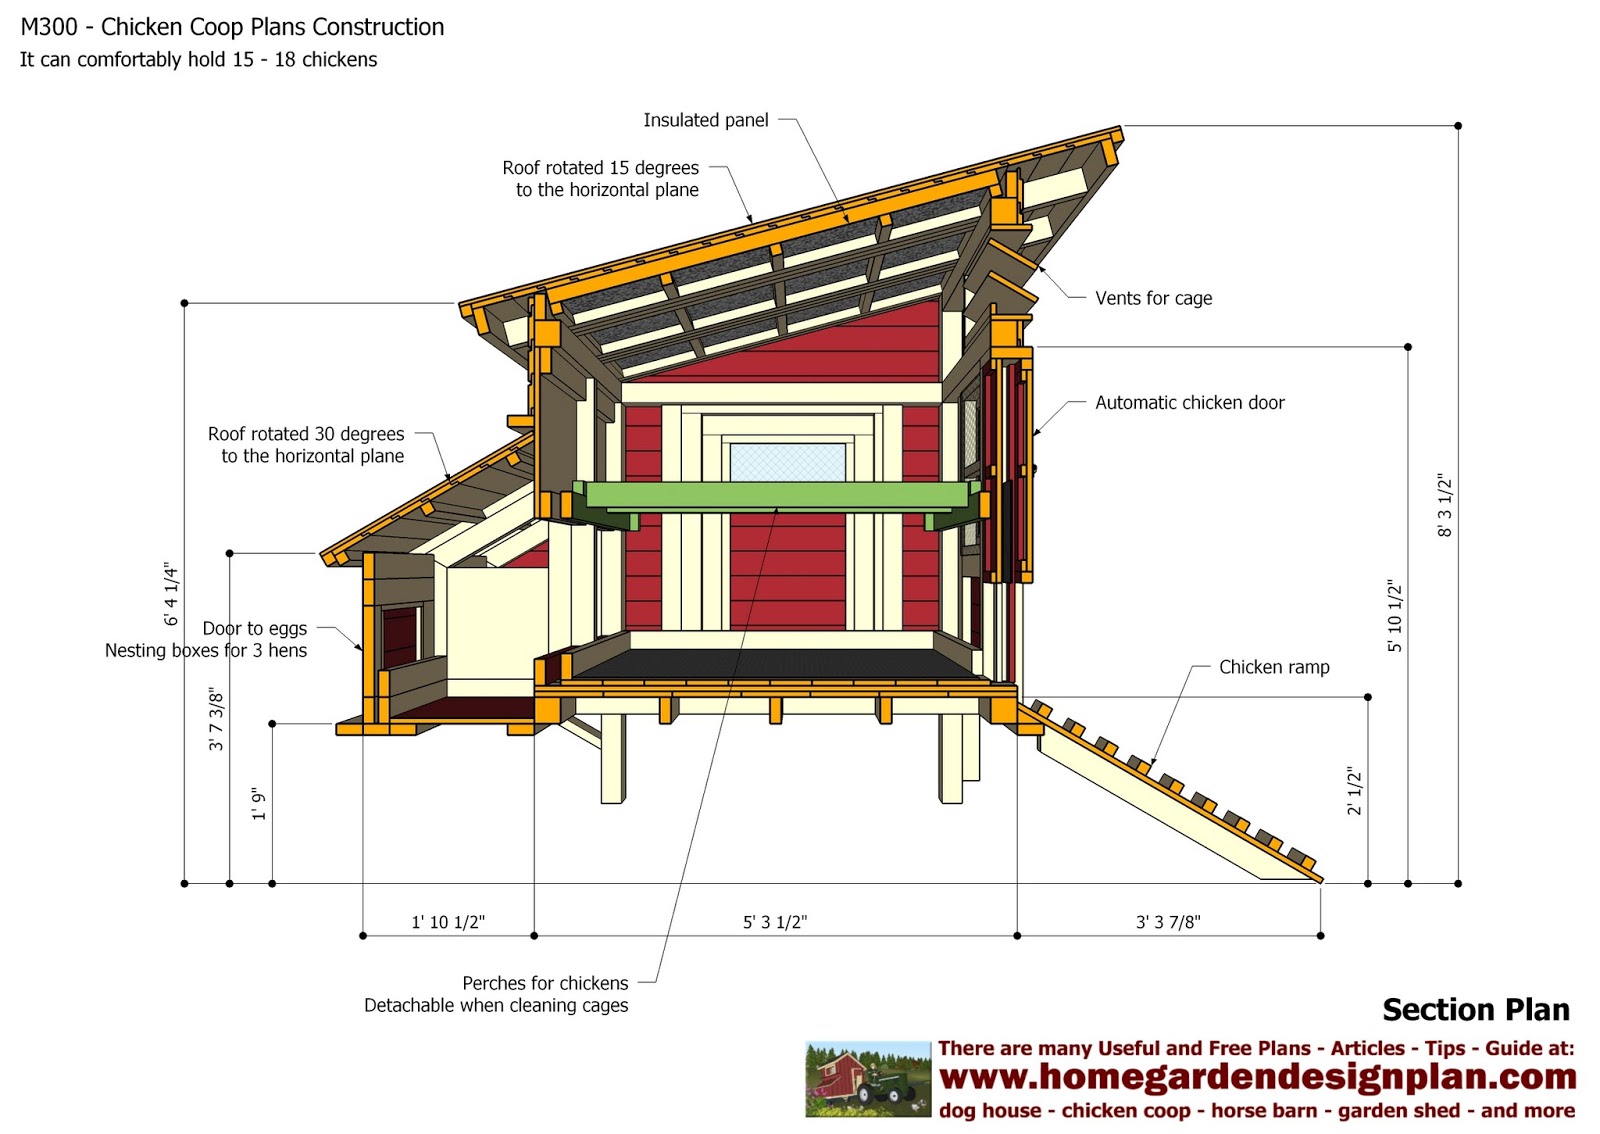 Chick Be: Guide A frame chicken coop plans